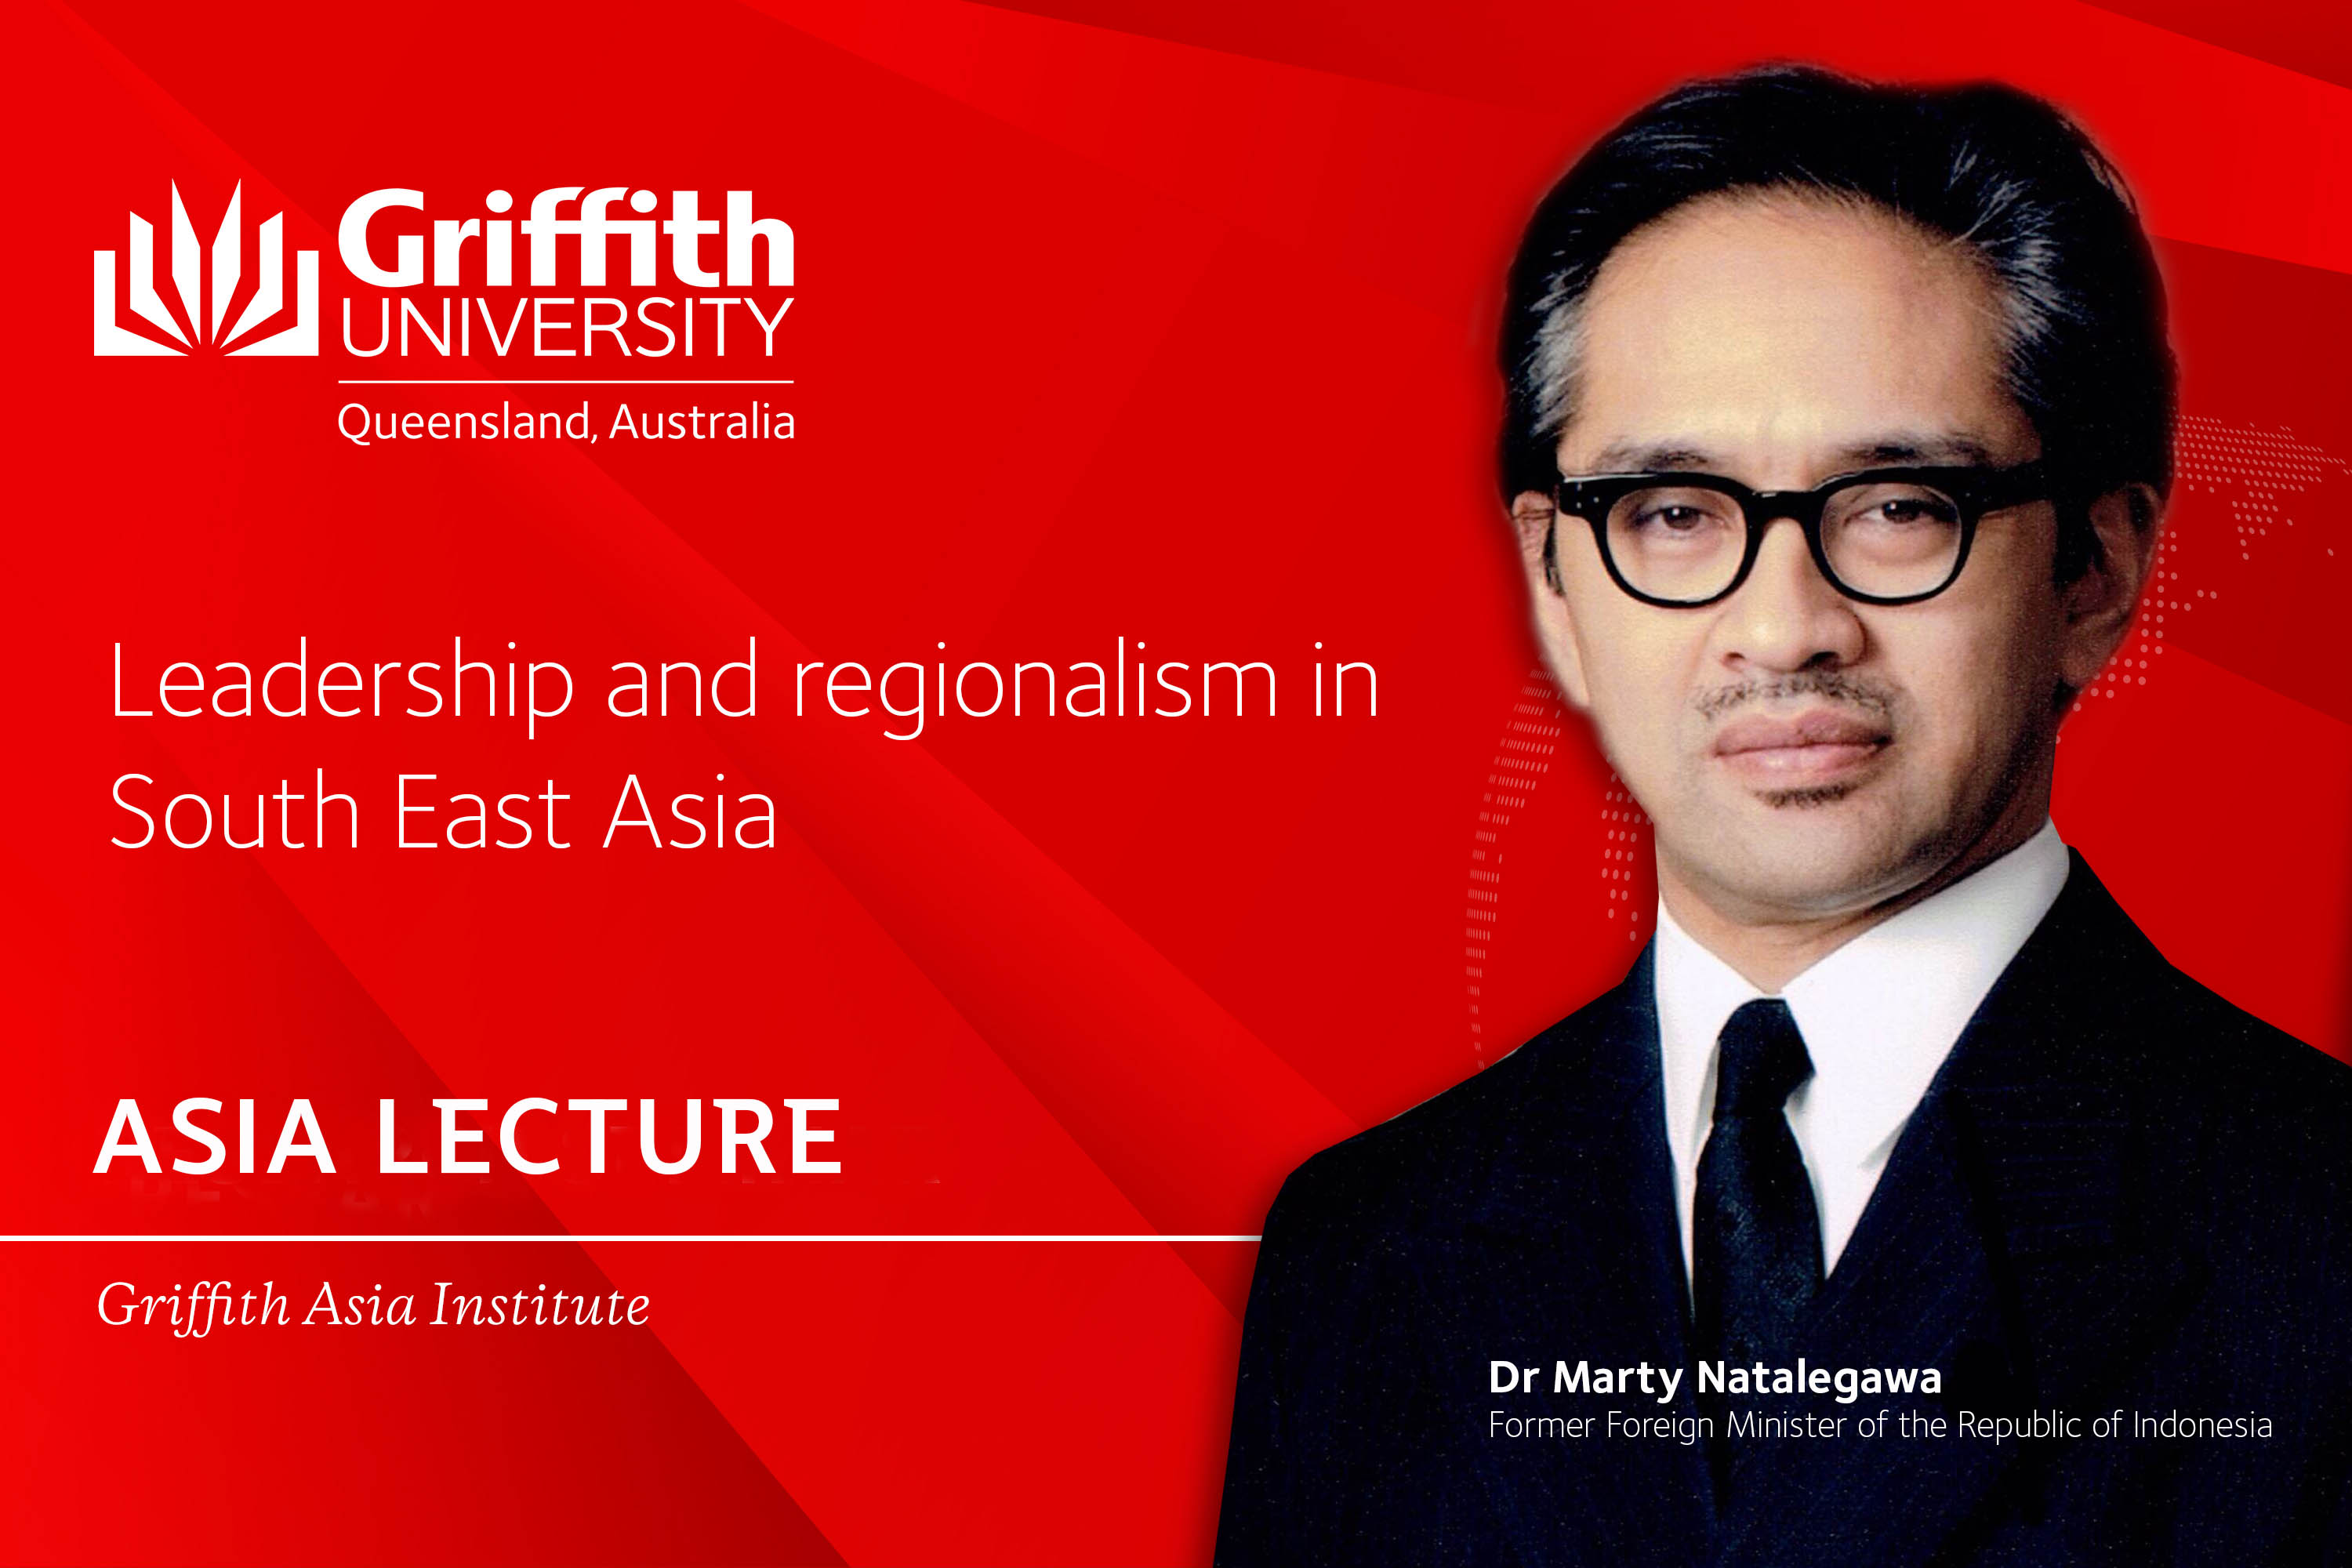 Griffith Asia Institute 2018 Asia Lecture: Leadership and regionalism in South East Asia